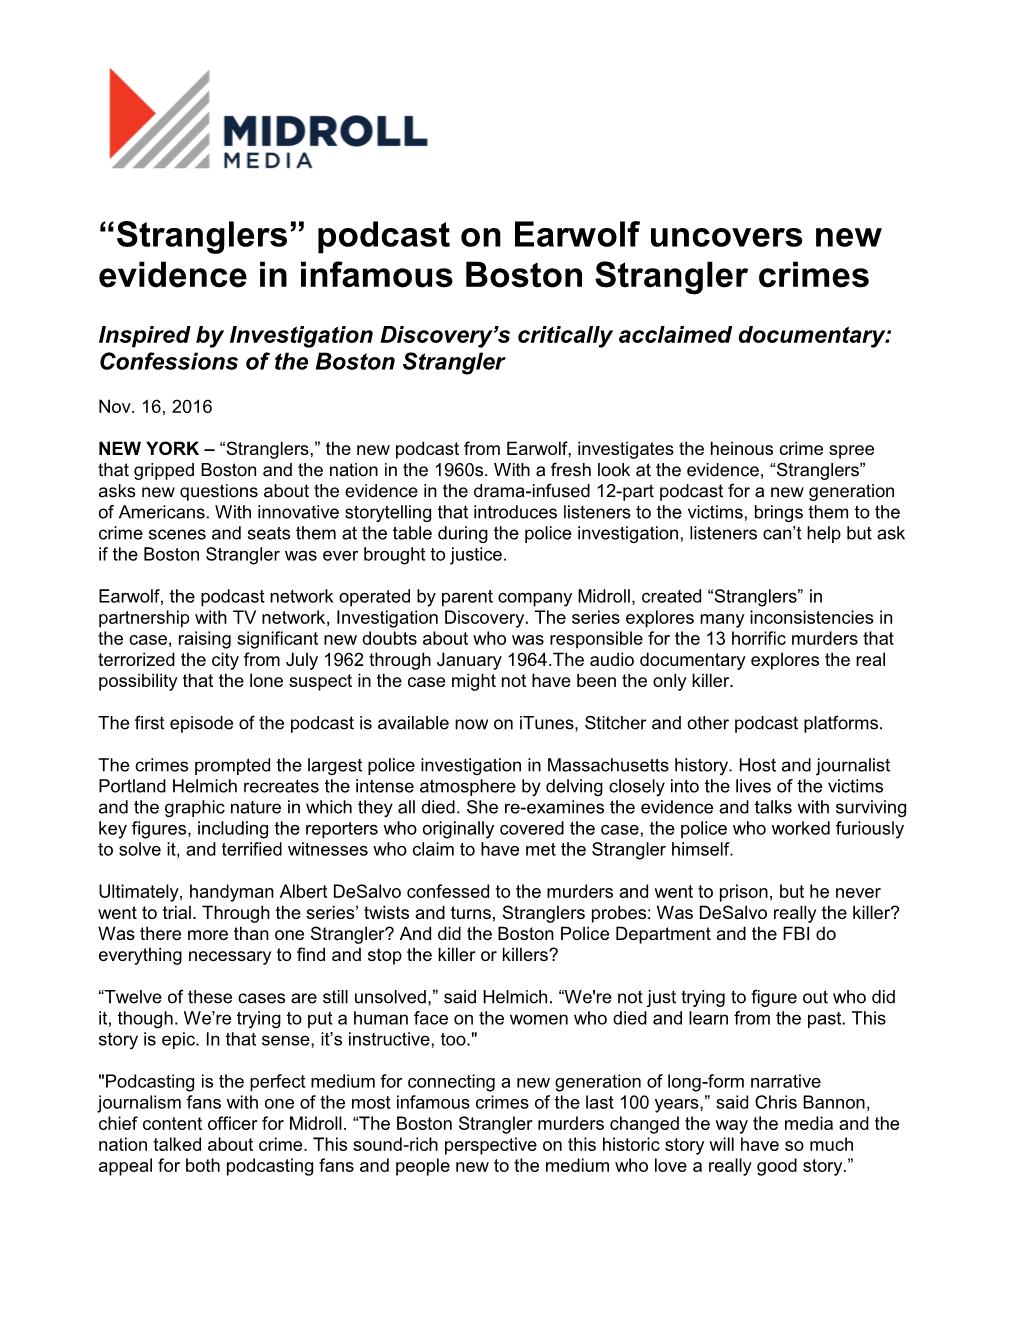 “Stranglers” Podcast on Earwolf Uncovers New Evidence in Infamous Boston Strangler Crimes